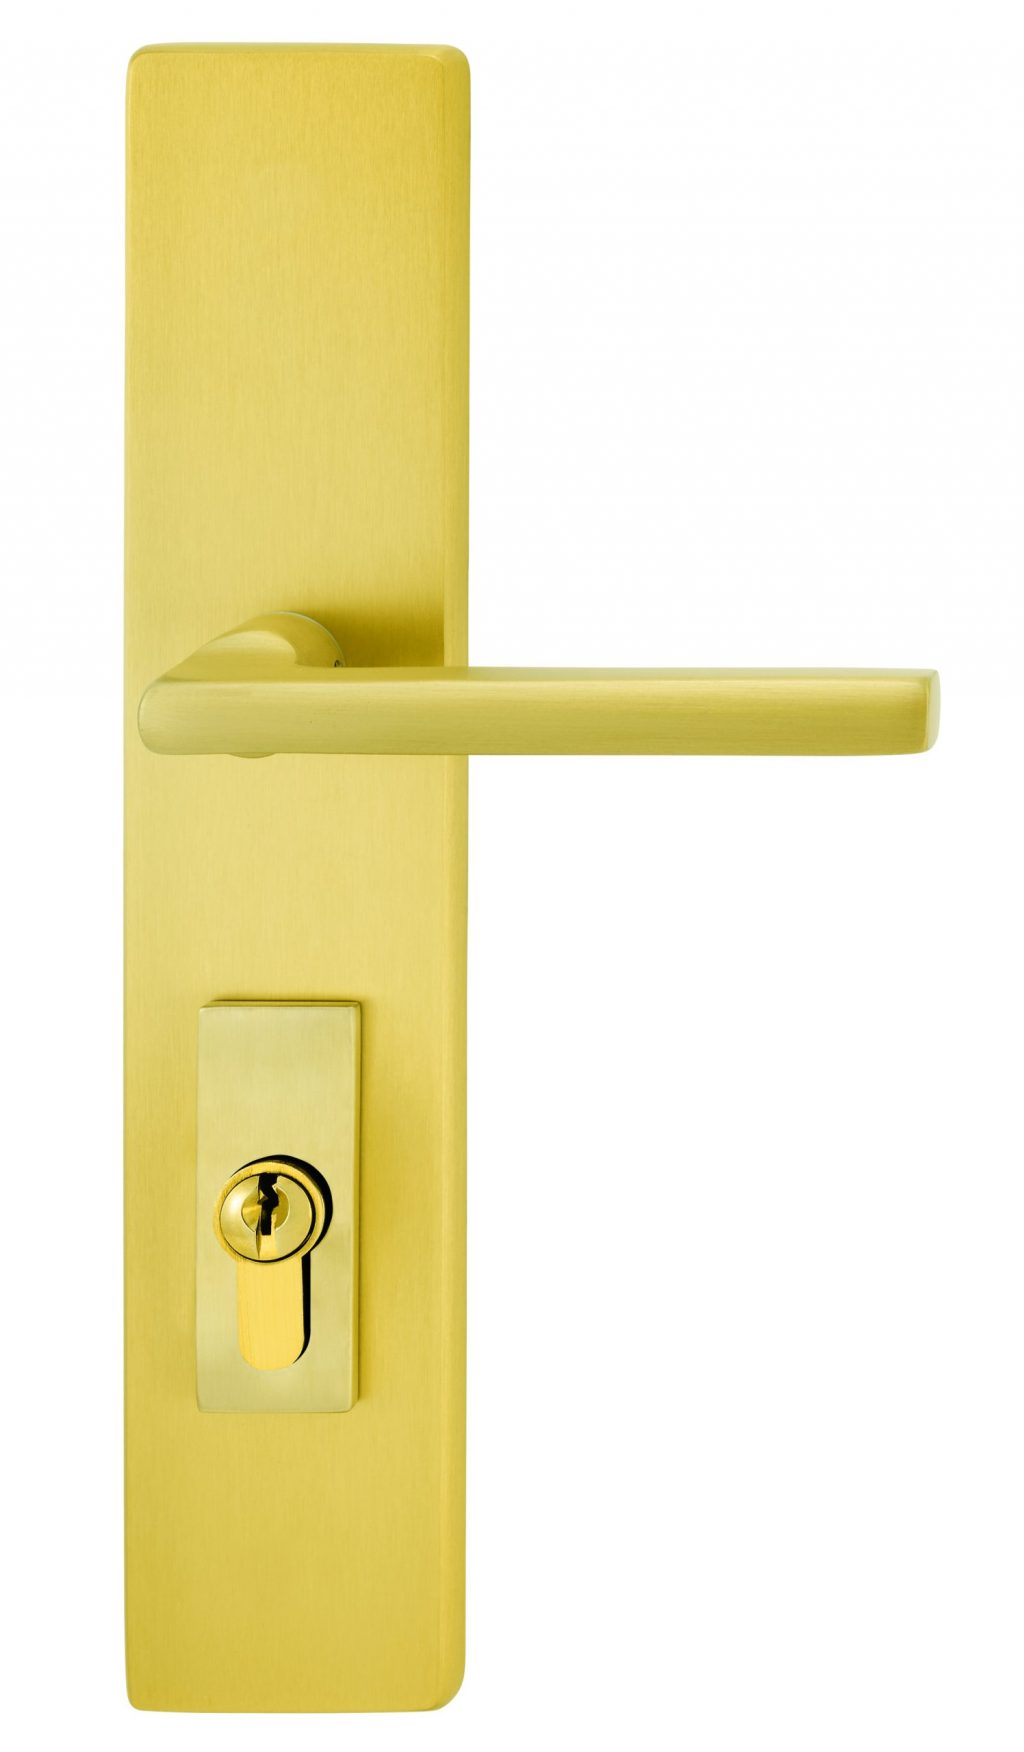 Item No.74943 (US4 Satin Brass, Lacquered)